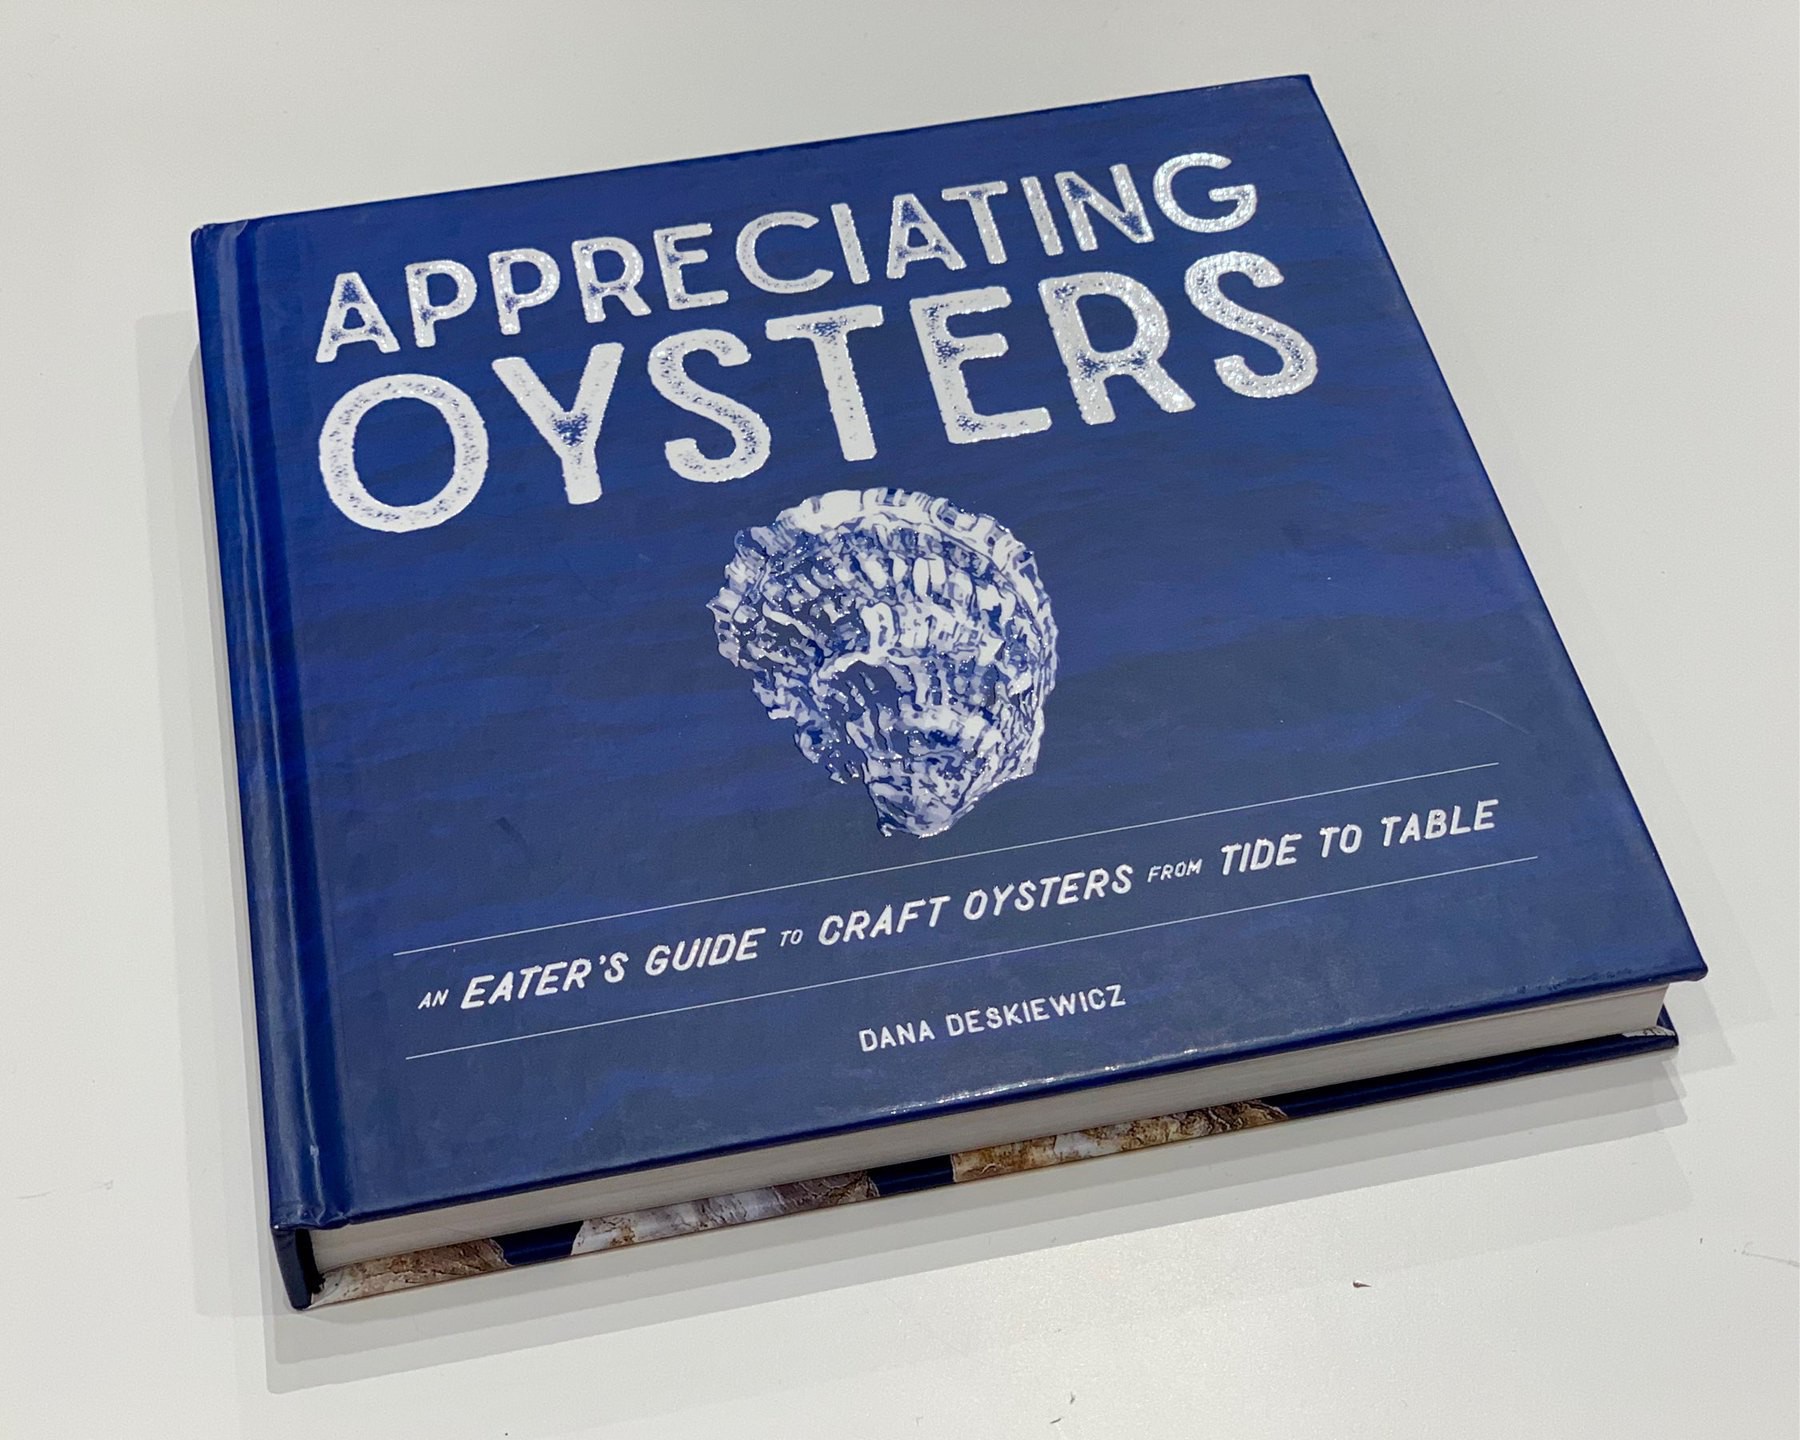 Picture of book entitled "Appreciating Oysters"